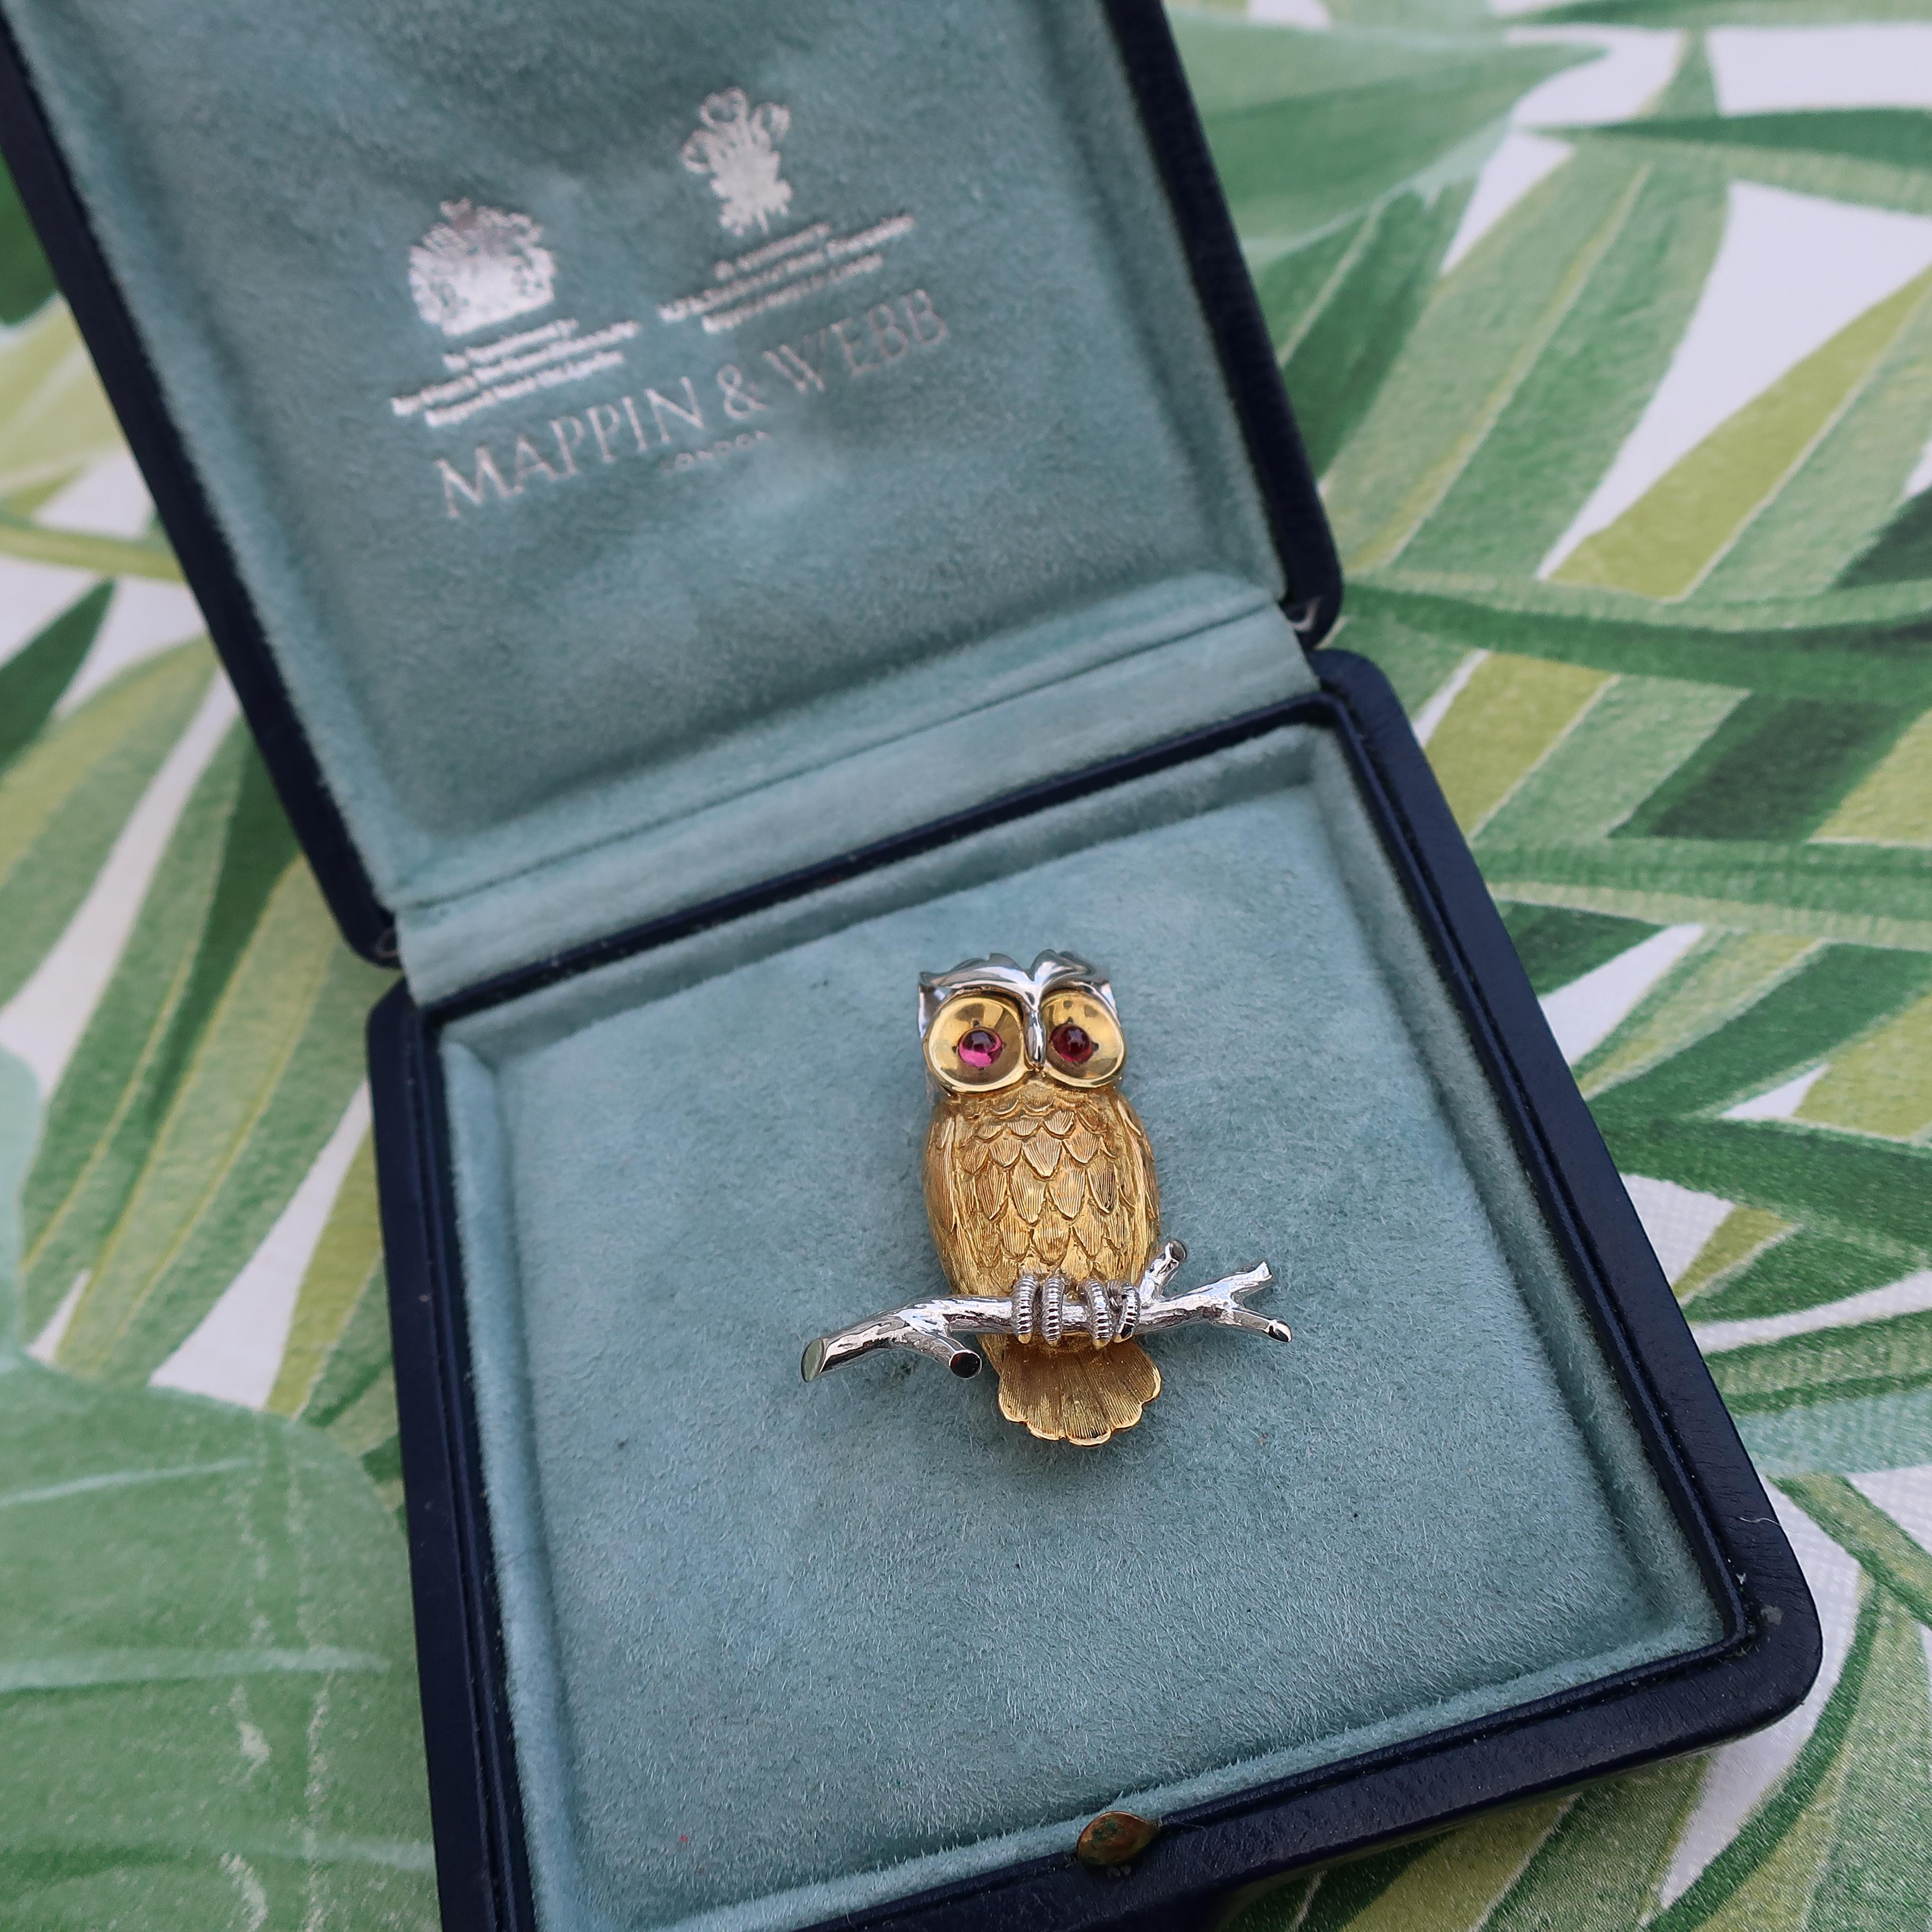 18 Karat Gold Owl Brooch with Ruby Eyes

A unique 18ct yellow and white gold owl brooch. This gorgeous little fella has cabochon ruby eyes. His body is 18ct solid yellow gold, and his head and the branch are 18ct solid white gold
This owl comes in a